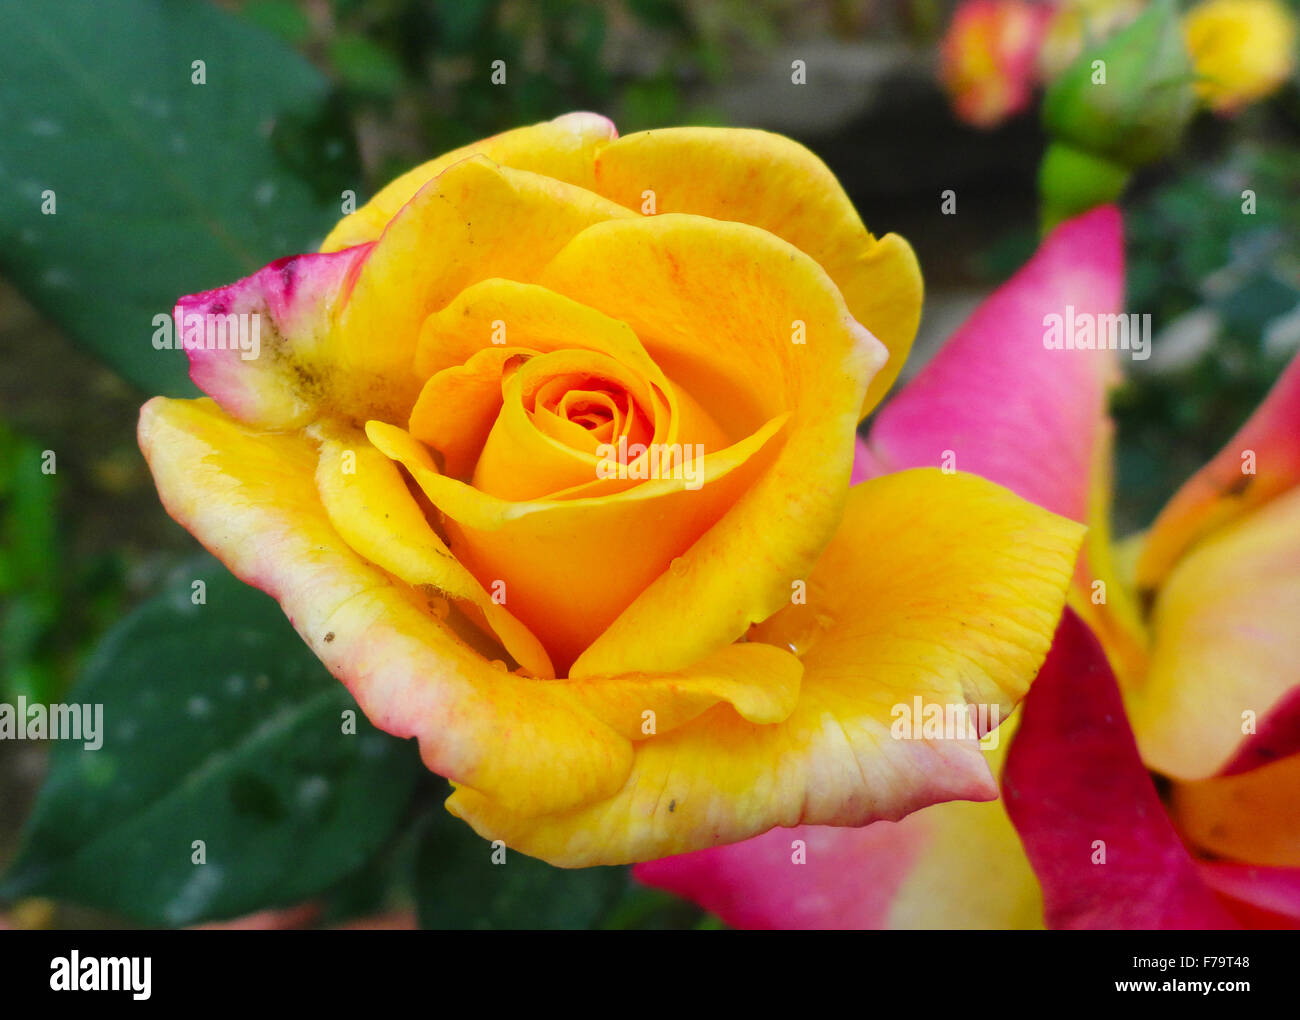 Beautiful blooming orange and yellow rose with green leaf Stock Photo